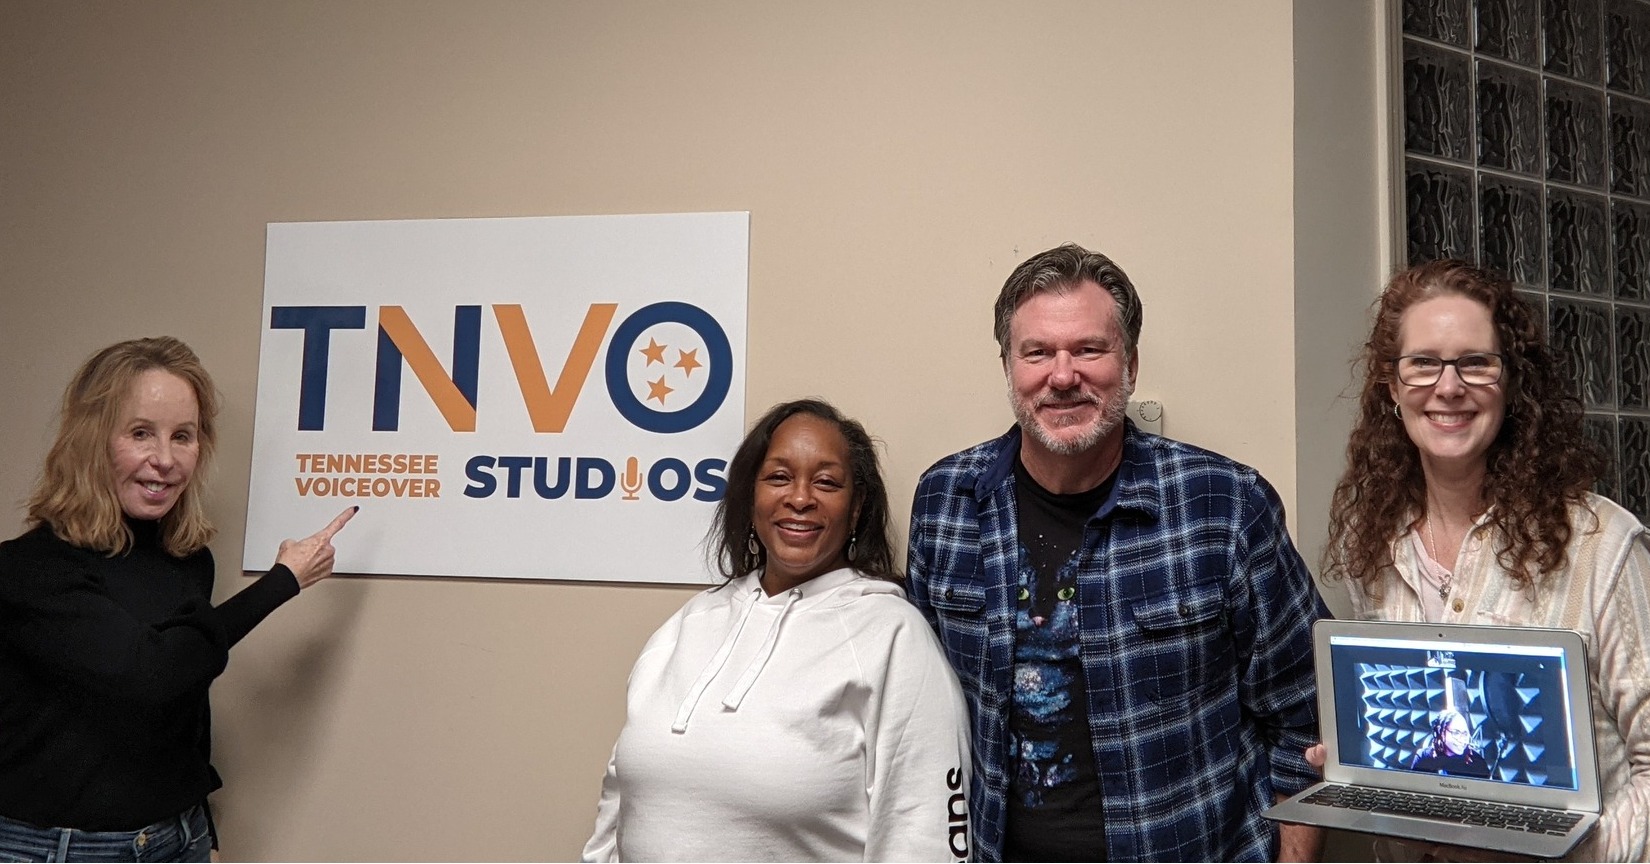 Kevin teaches at Tennessee Voiceover Studios. From left to right are Anne Ghrist, Sabrina JB Moore, Kevin and Christi Bowen.